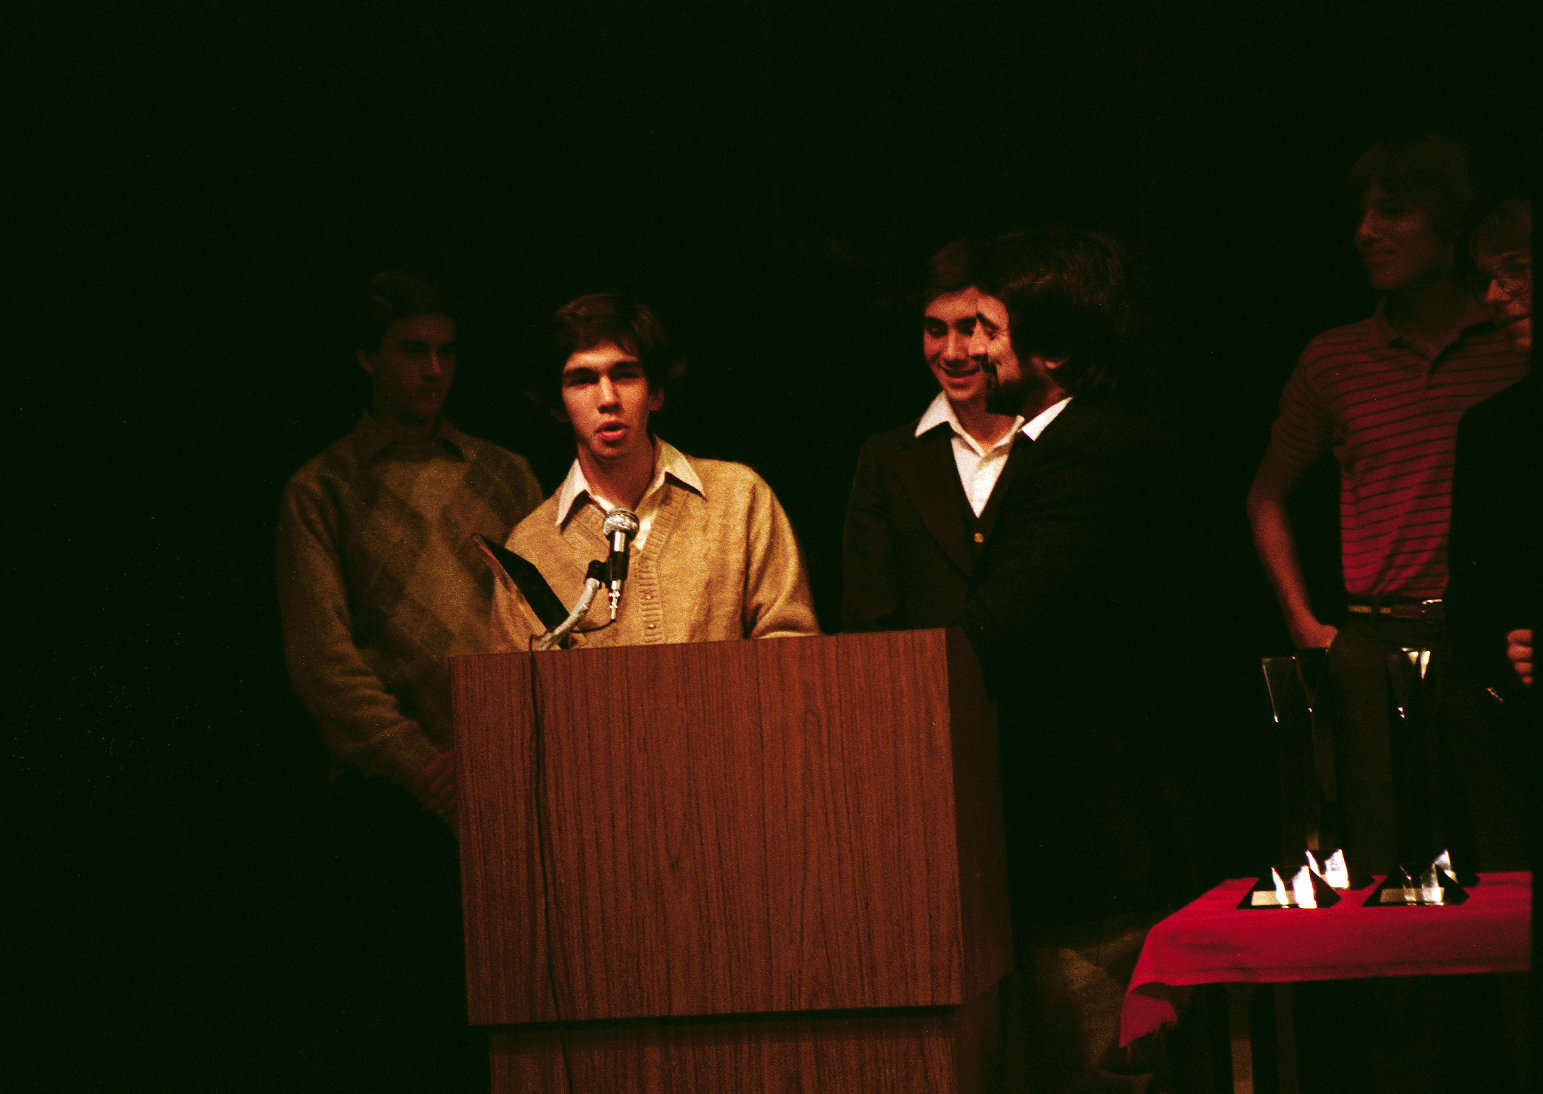 Jon Teboe accepts the Super-8 Third Place award from Tom Savini at the 1983 Cinemagic/SVA Short Film Search at Lincoln Center. Also present are the other teenage producers of 